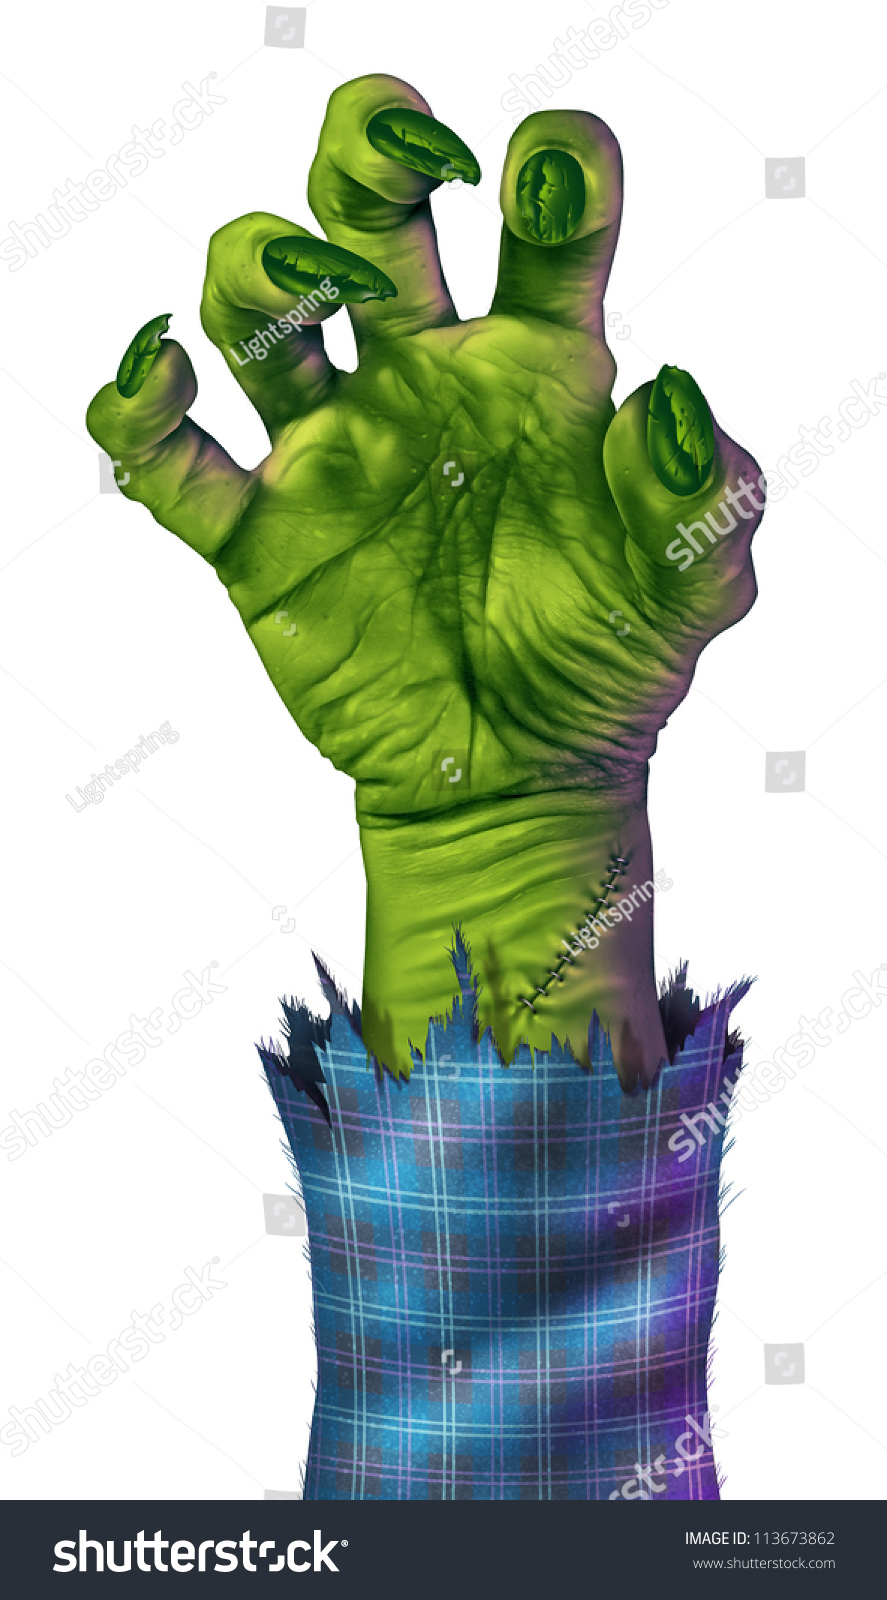 Zombie Hand Reaching To Grab Something Or Someone As A ...